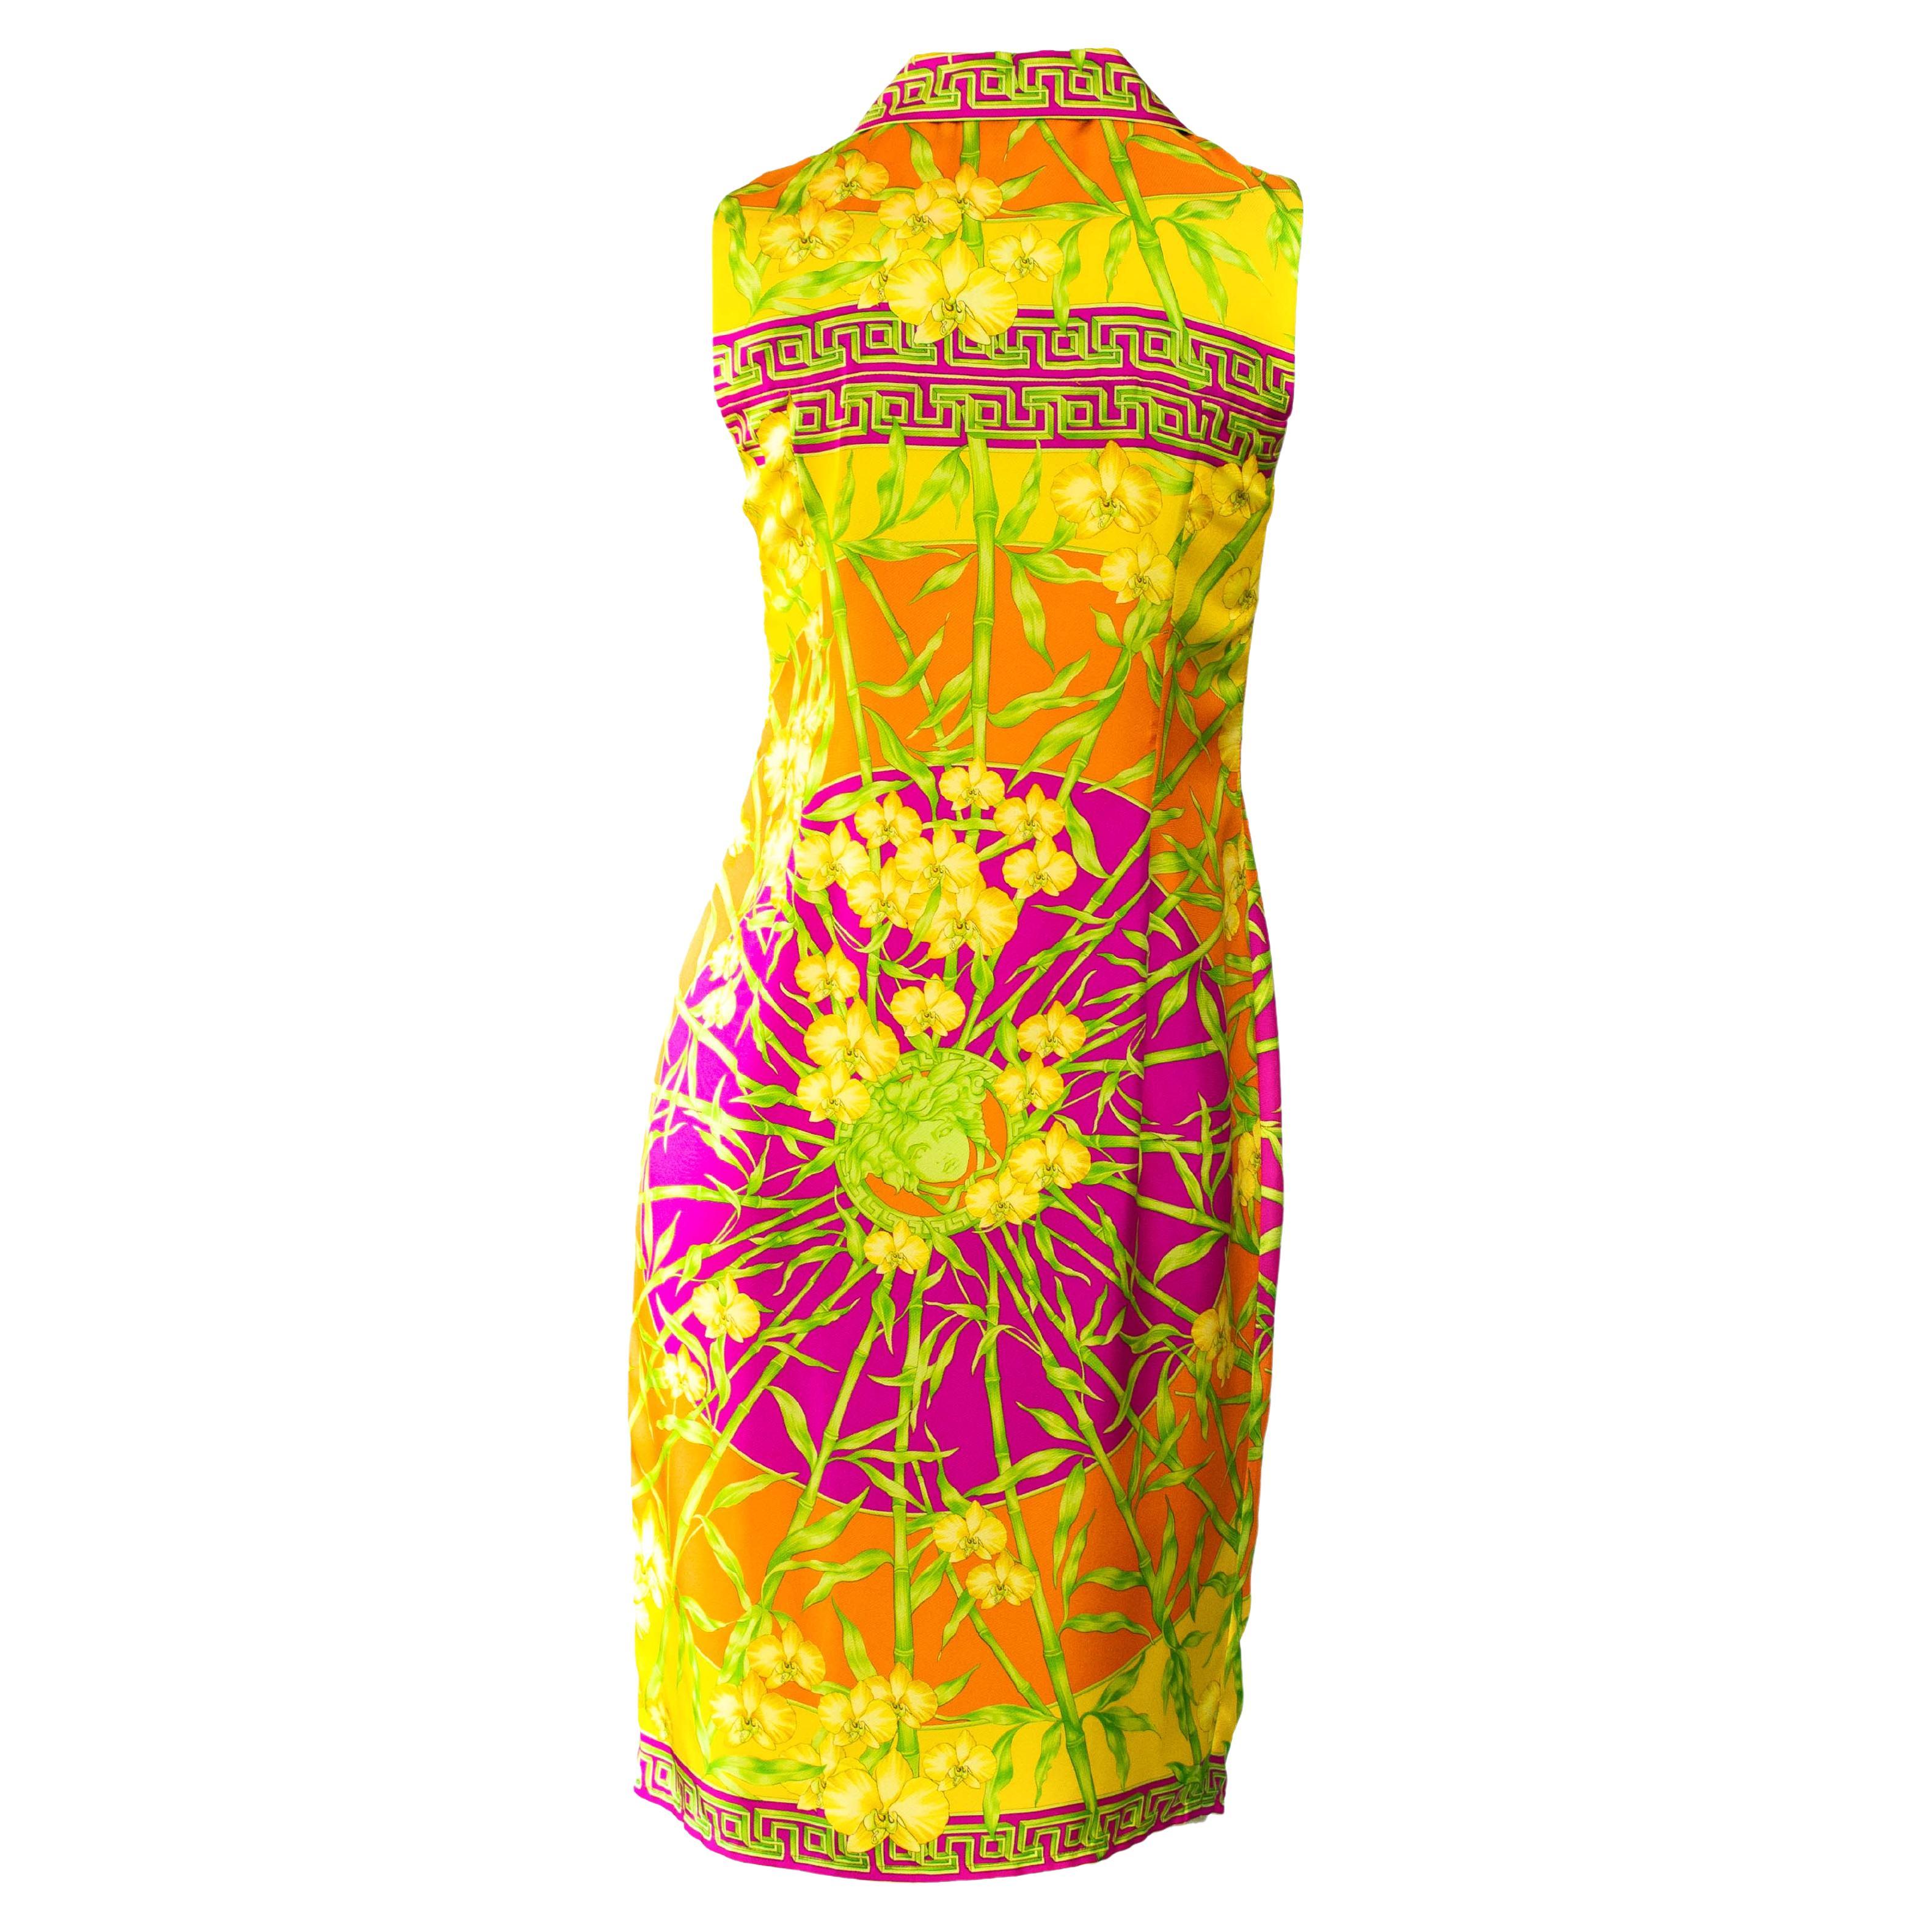 S/S 2000 Gianni Versace Silk Bamboo and Orchid Jungle Sleeveless Dress ...